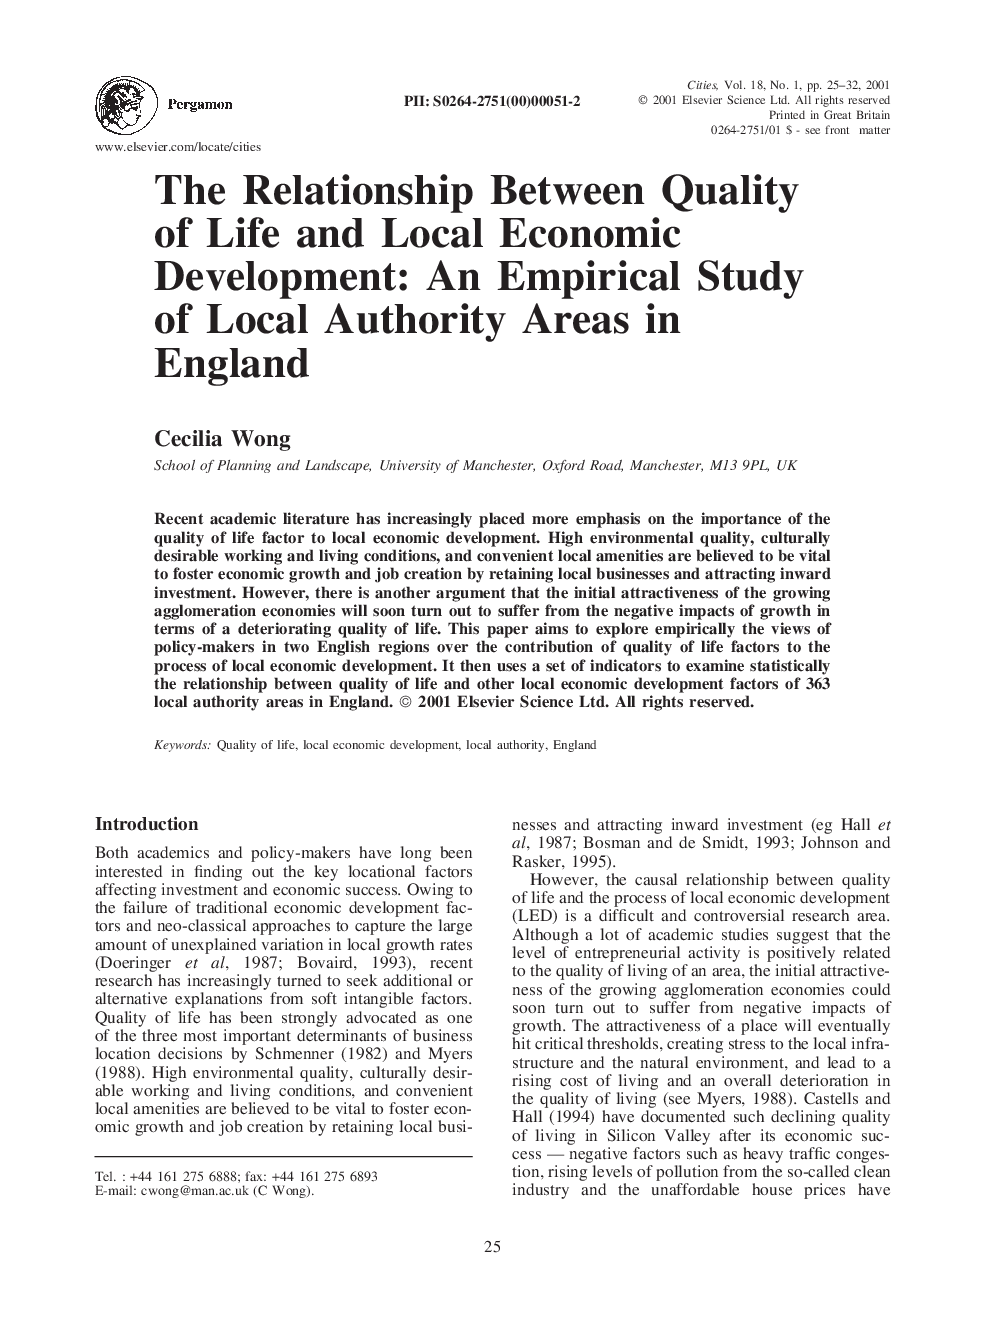 The Relationship Between Quality of Life and Local Economic Development: An Empirical Study of Local Authority Areas in England